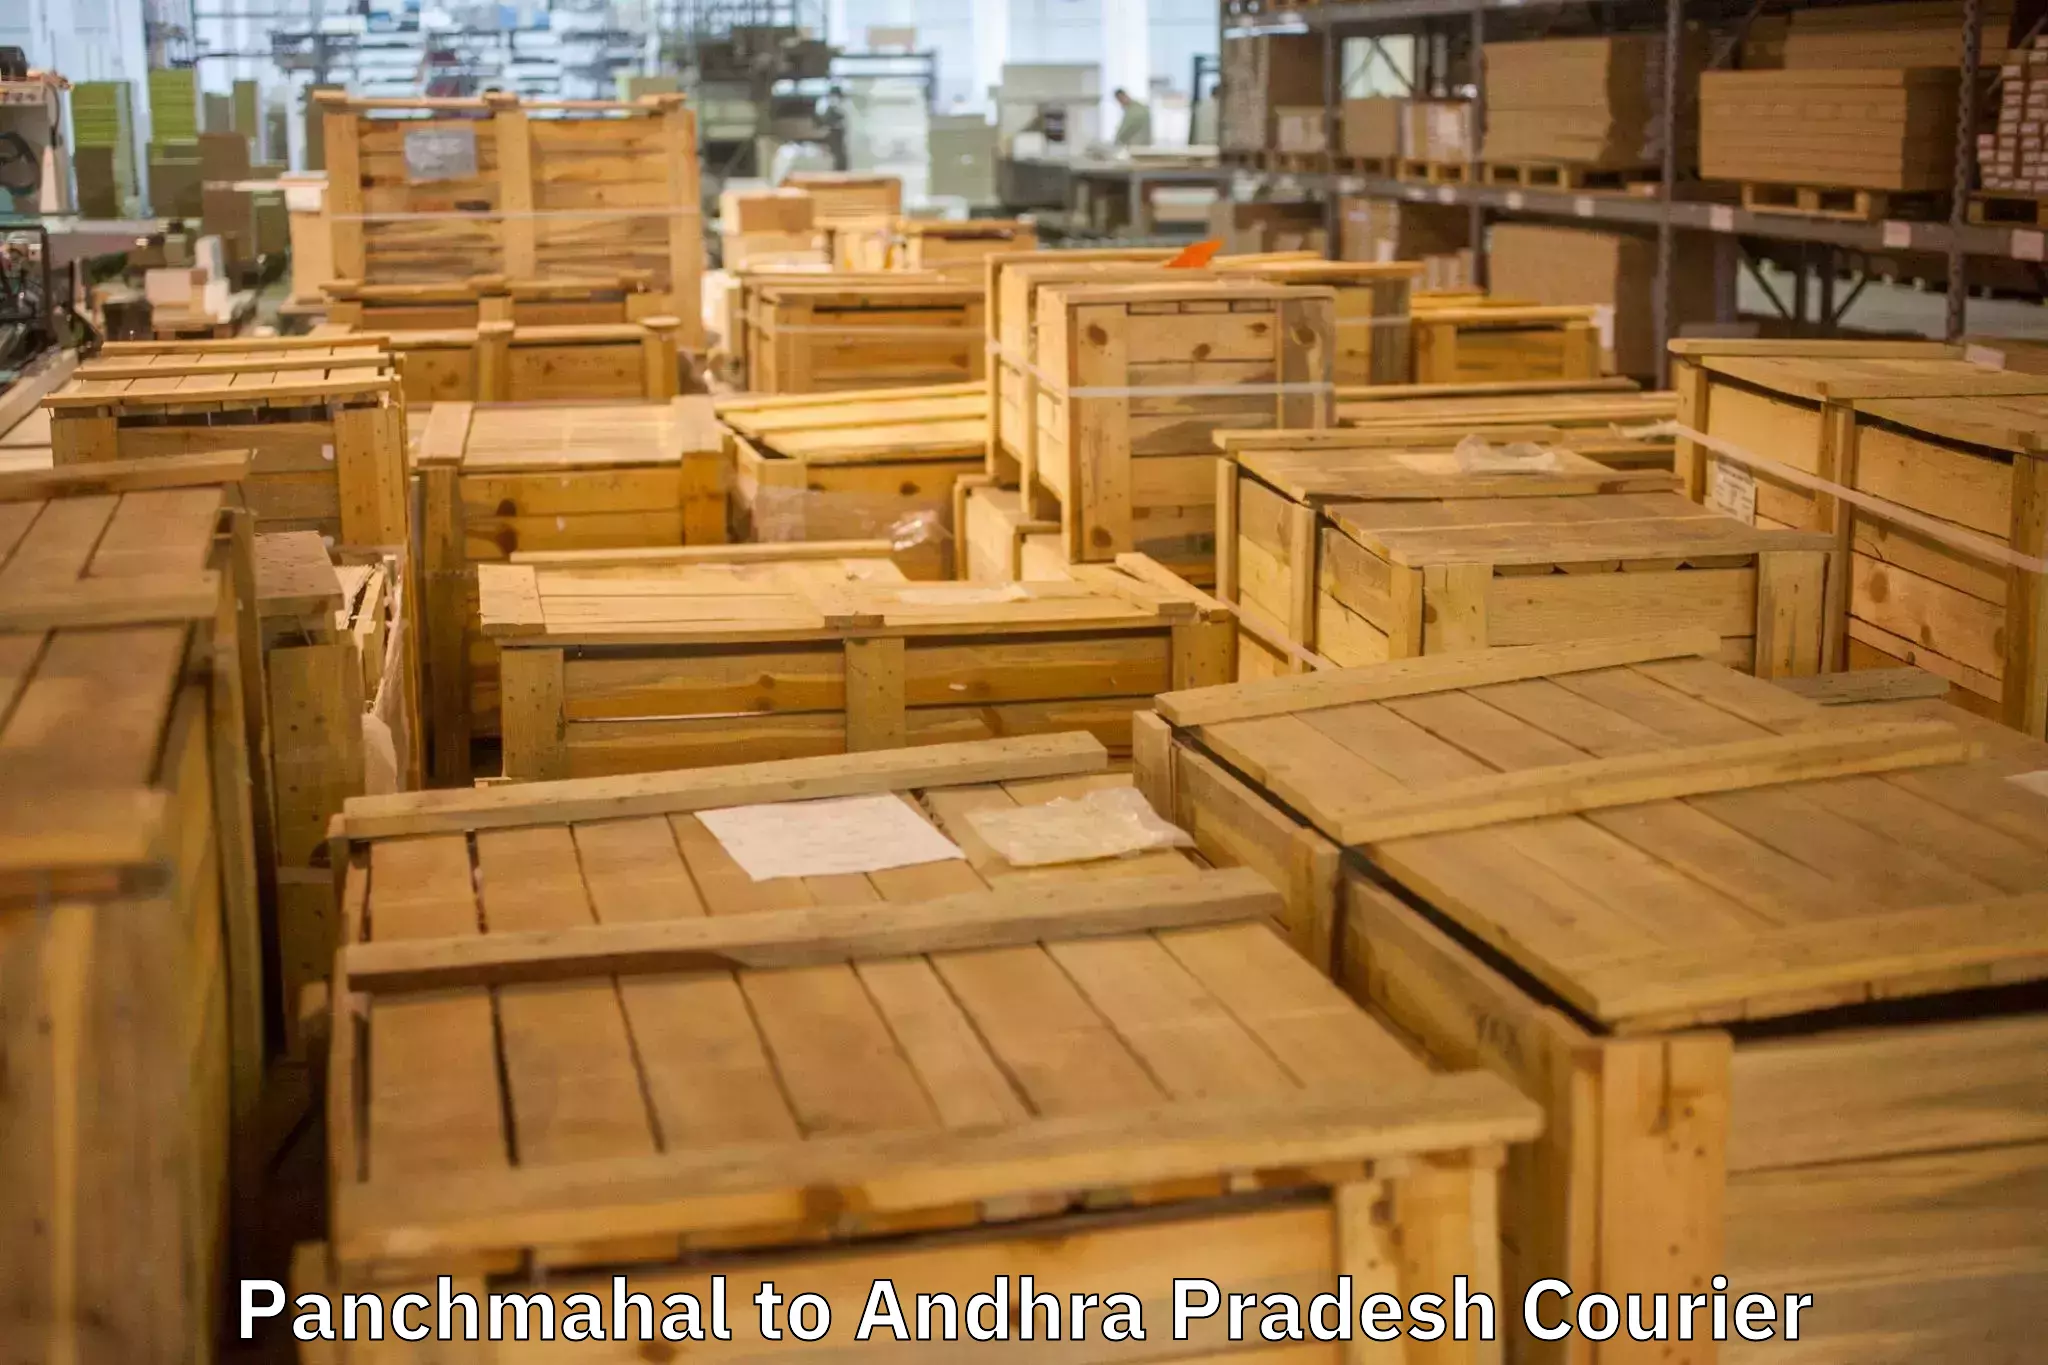 Furniture transport professionals Panchmahal to Nellore